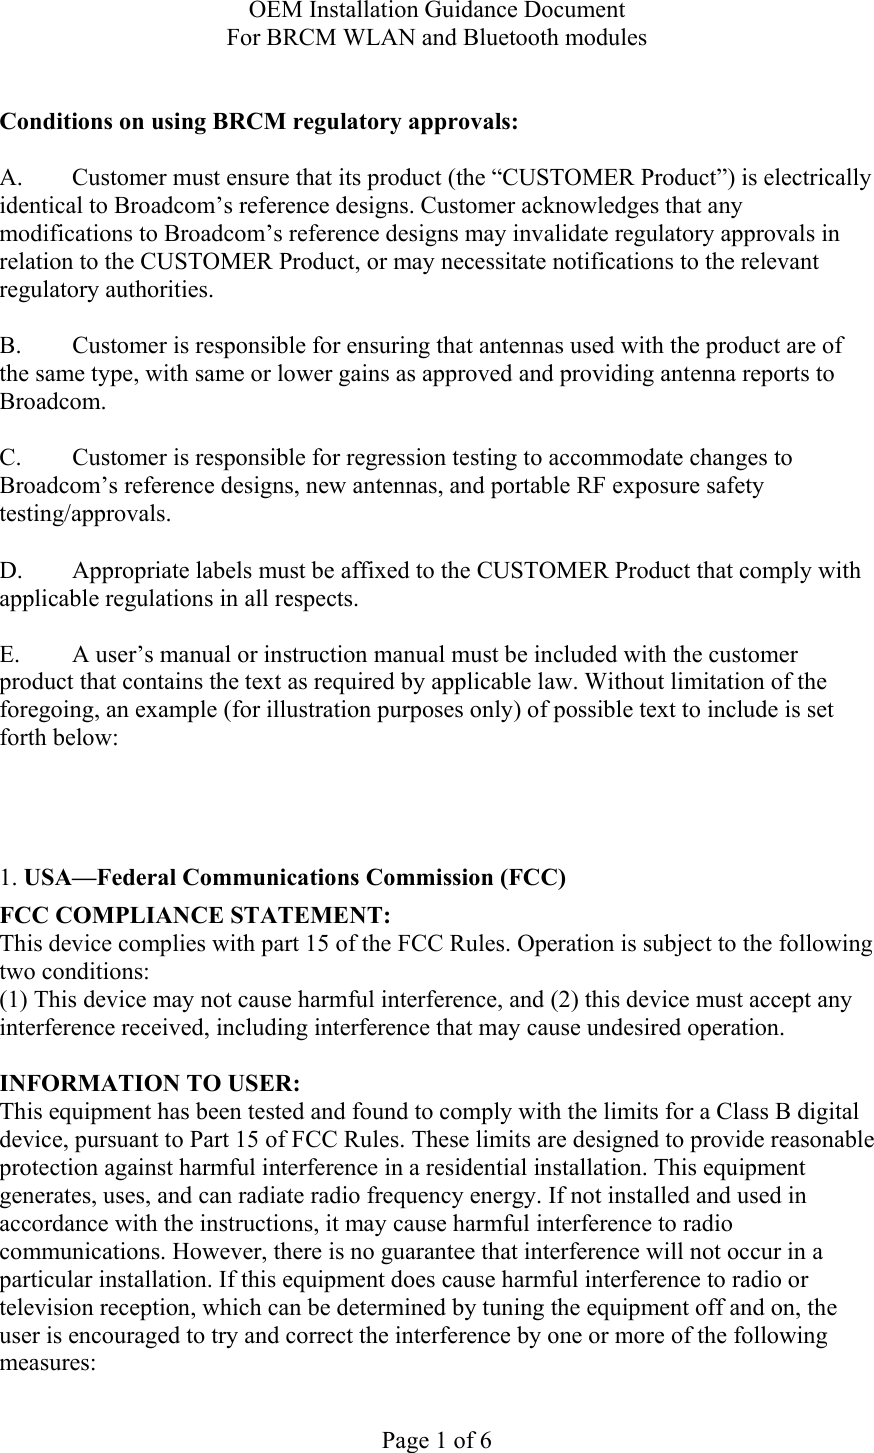 OEM Installation Guidance Document For BRCM WLAN and Bluetooth modules  Page 1 of 6  Conditions on using BRCM regulatory approvals:   A.  Customer must ensure that its product (the “CUSTOMER Product”) is electrically identical to Broadcom’s reference designs. Customer acknowledges that any modifications to Broadcom’s reference designs may invalidate regulatory approvals in relation to the CUSTOMER Product, or may necessitate notifications to the relevant regulatory authorities.  B.   Customer is responsible for ensuring that antennas used with the product are of the same type, with same or lower gains as approved and providing antenna reports to Broadcom.  C.   Customer is responsible for regression testing to accommodate changes to Broadcom’s reference designs, new antennas, and portable RF exposure safety testing/approvals.  D.  Appropriate labels must be affixed to the CUSTOMER Product that comply with applicable regulations in all respects.    E.  A user’s manual or instruction manual must be included with the customer product that contains the text as required by applicable law. Without limitation of the foregoing, an example (for illustration purposes only) of possible text to include is set forth below:      1. USA—Federal Communications Commission (FCC) FCC COMPLIANCE STATEMENT: This device complies with part 15 of the FCC Rules. Operation is subject to the following two conditions: (1) This device may not cause harmful interference, and (2) this device must accept any interference received, including interference that may cause undesired operation.  INFORMATION TO USER: This equipment has been tested and found to comply with the limits for a Class B digital device, pursuant to Part 15 of FCC Rules. These limits are designed to provide reasonable protection against harmful interference in a residential installation. This equipment generates, uses, and can radiate radio frequency energy. If not installed and used in accordance with the instructions, it may cause harmful interference to radio communications. However, there is no guarantee that interference will not occur in a particular installation. If this equipment does cause harmful interference to radio or television reception, which can be determined by tuning the equipment off and on, the user is encouraged to try and correct the interference by one or more of the following measures:  